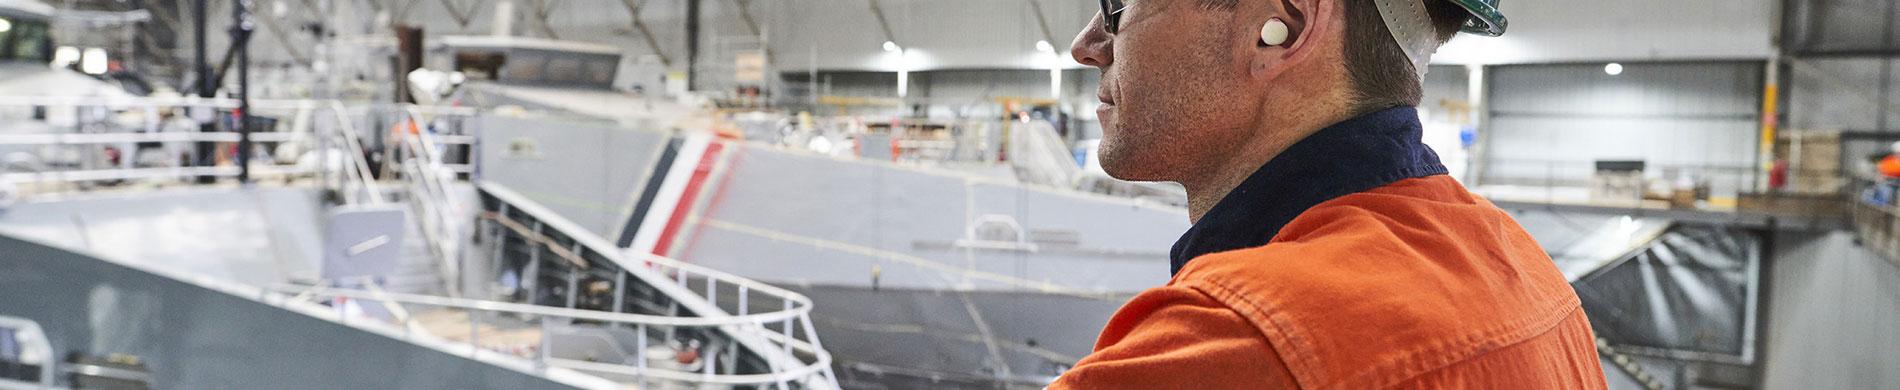 Man in high-vis with naval vessels under construction in the background